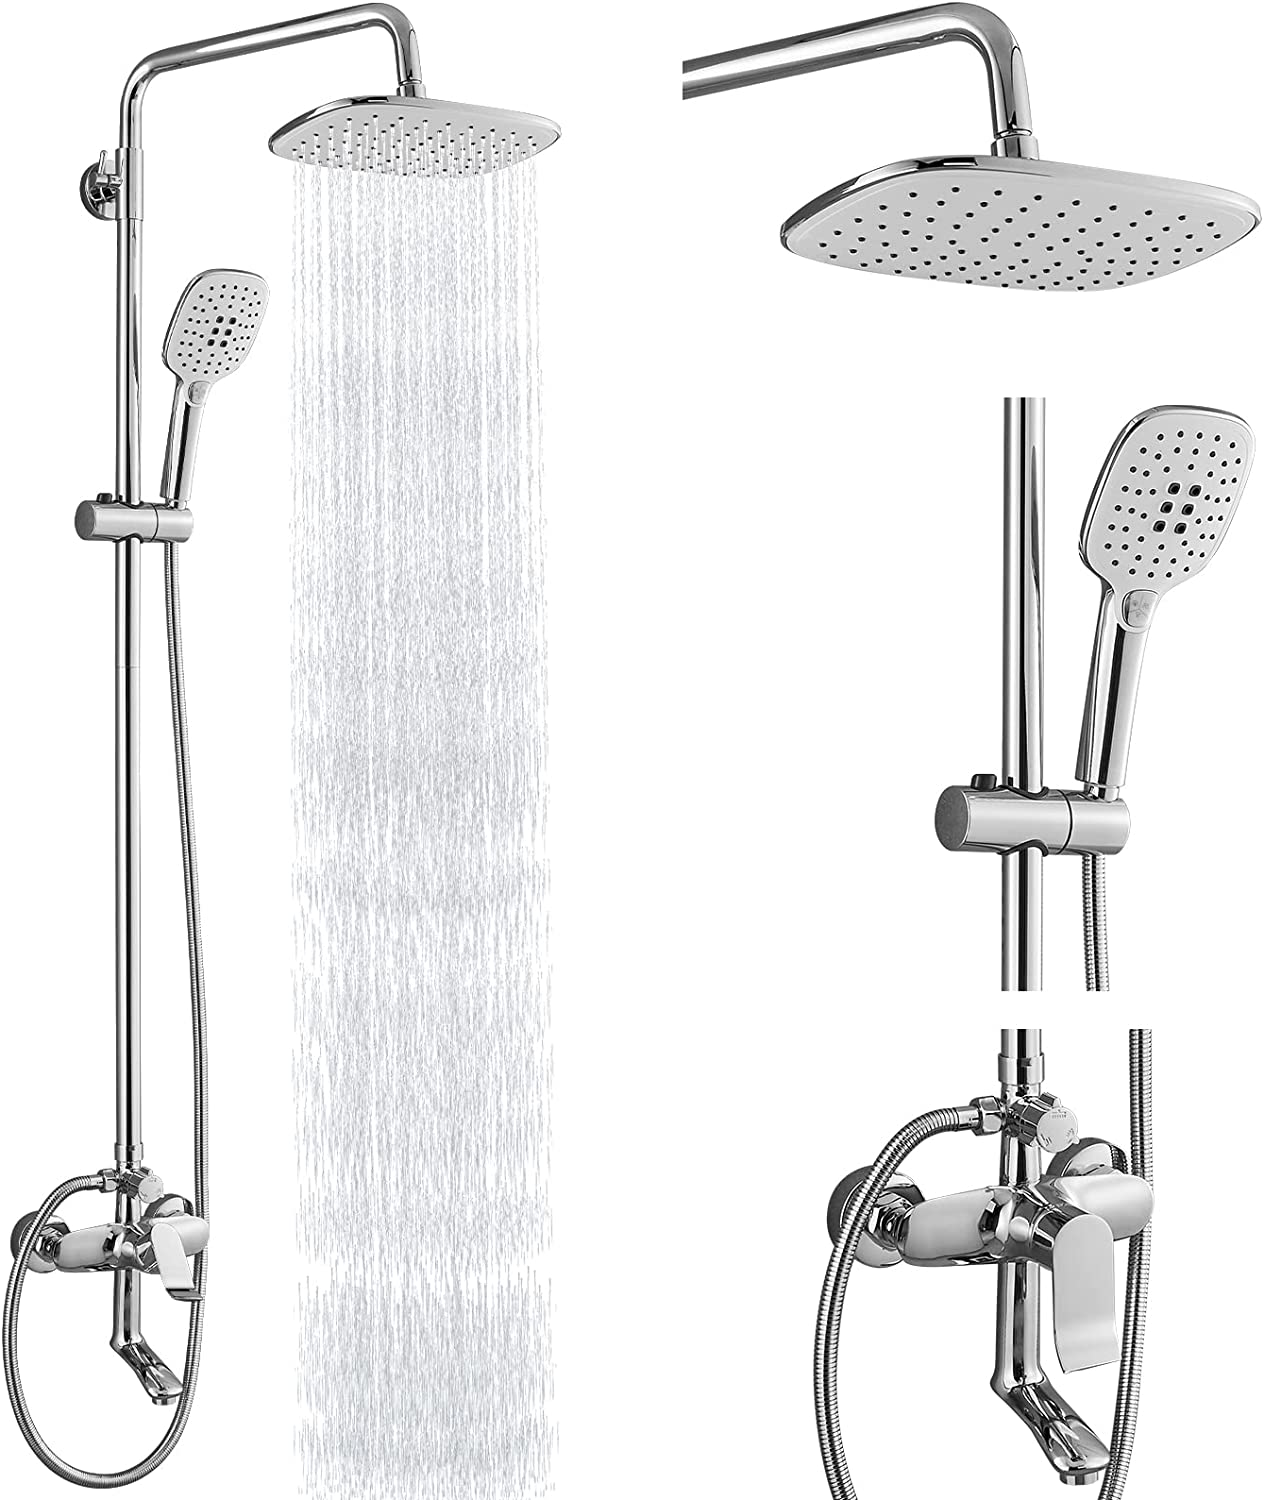 Exposed Shower System Polish Chrome 3 Functional Bathroom Shower Set 9 Inch Rainfall Shower Head with Handheld Sprayer Complete Set Adjustable Hand Spray Tub Spout Wall Mount